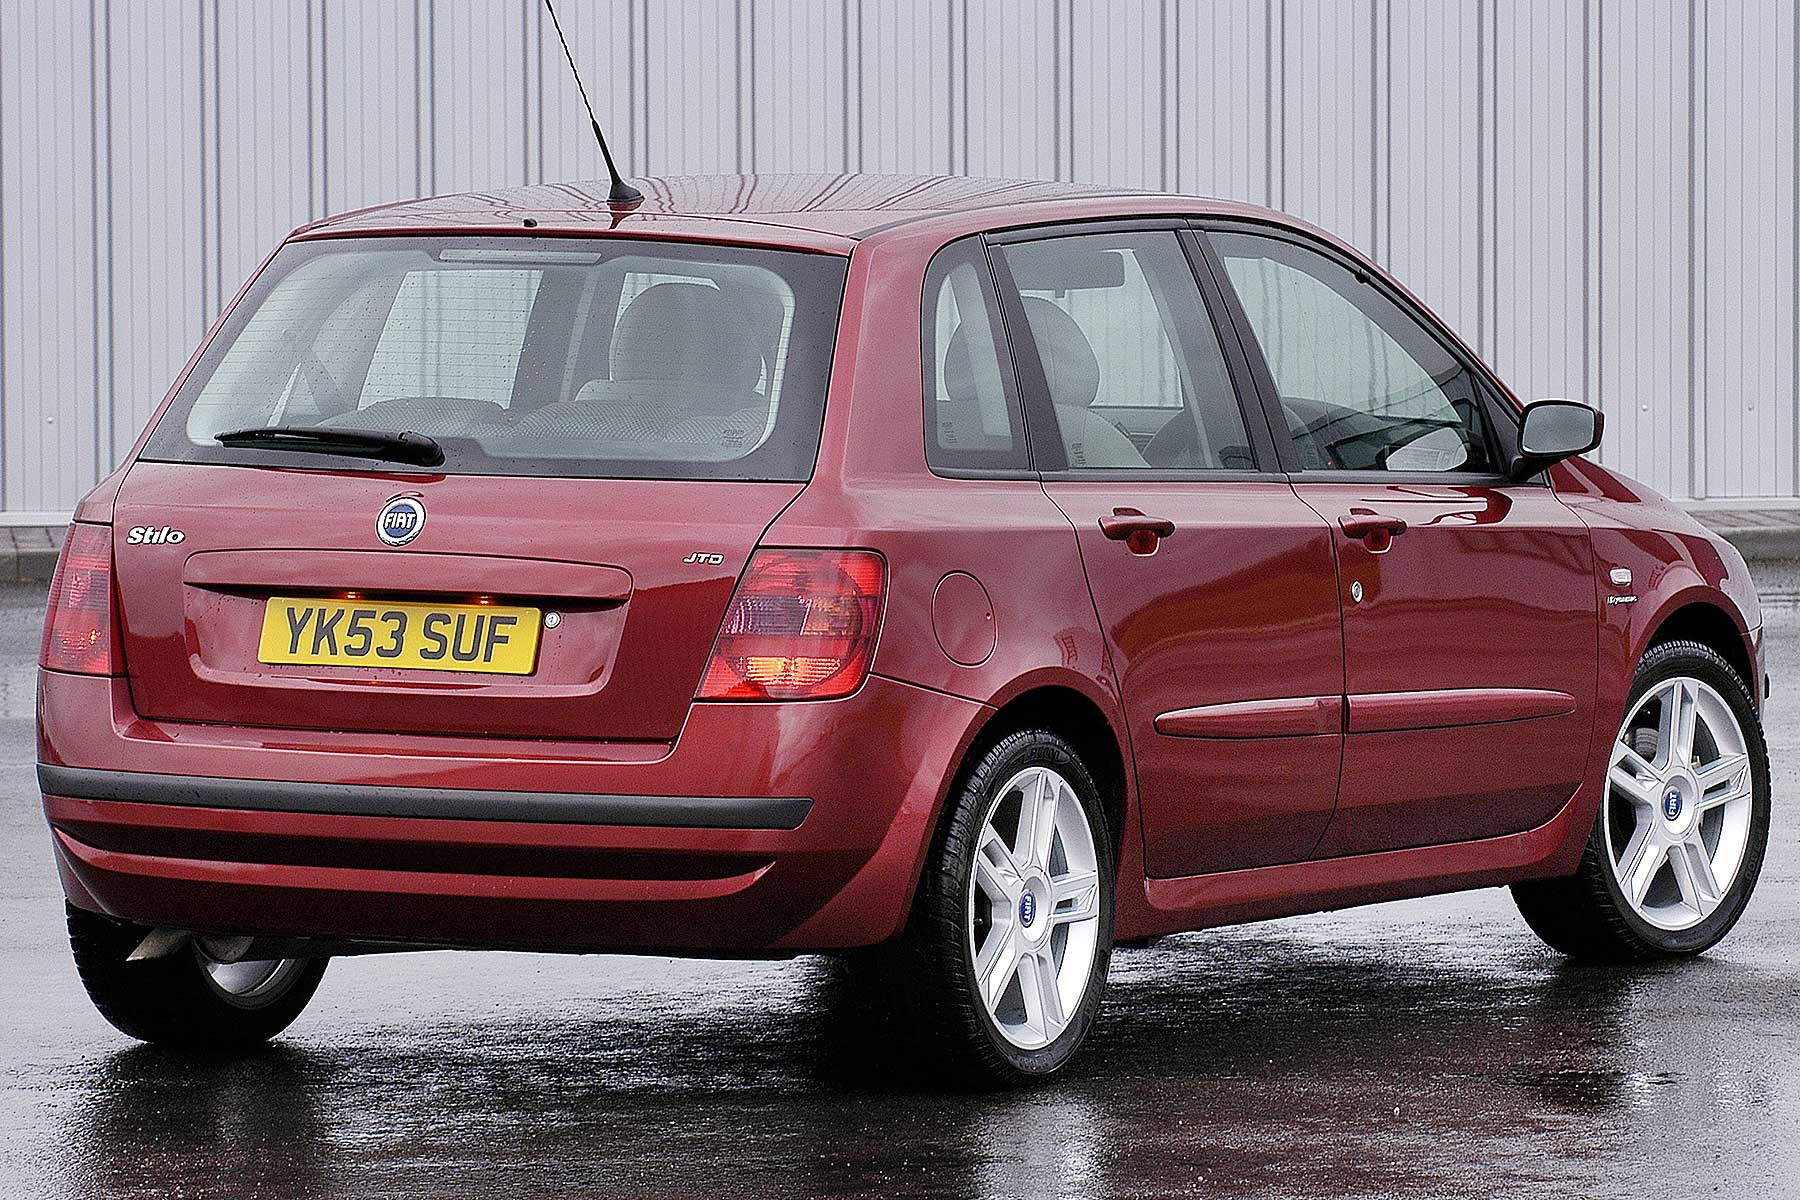 Fiat Stilo one of Europe's biggest lossmaking cars